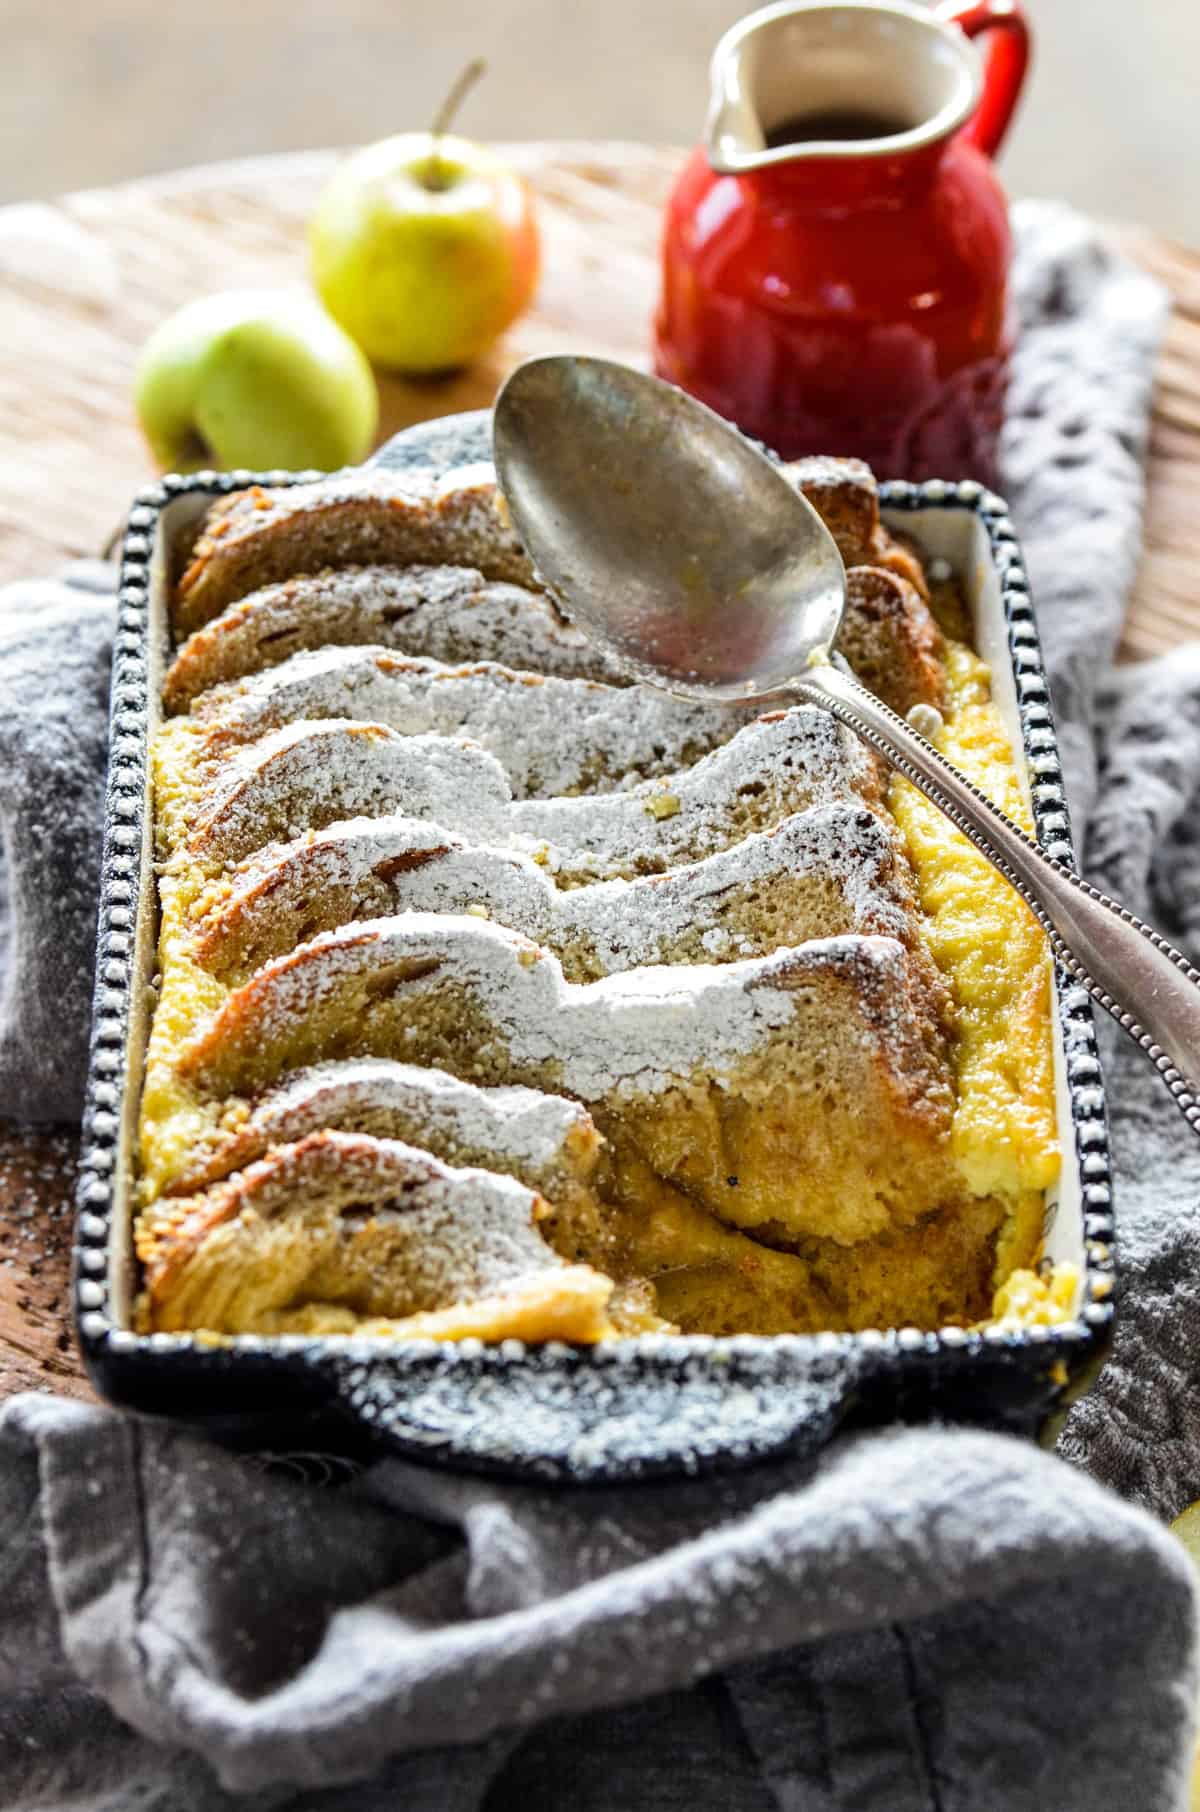 Apple Cardamom Bread Pudding is the best bread pudding we have ever had! This Apple Cardamom Bread Pudding recipe has sweet apples and citrusy cardamom for an indulgent dessert perfect for your next dinner party!